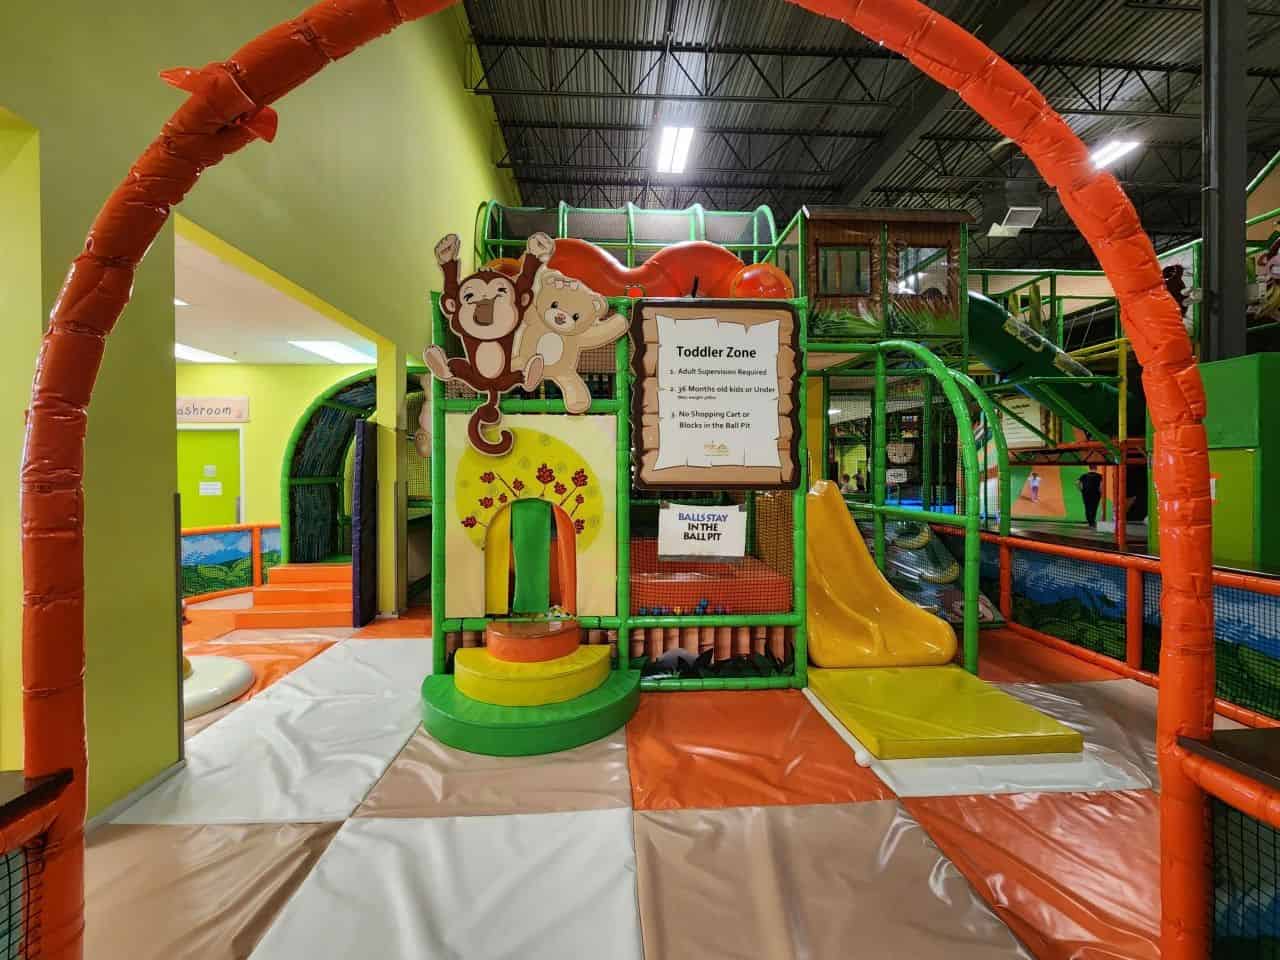 Hide N Seek Toddler Indoor Playground is great entertainment for small children in Calgary Alberta.